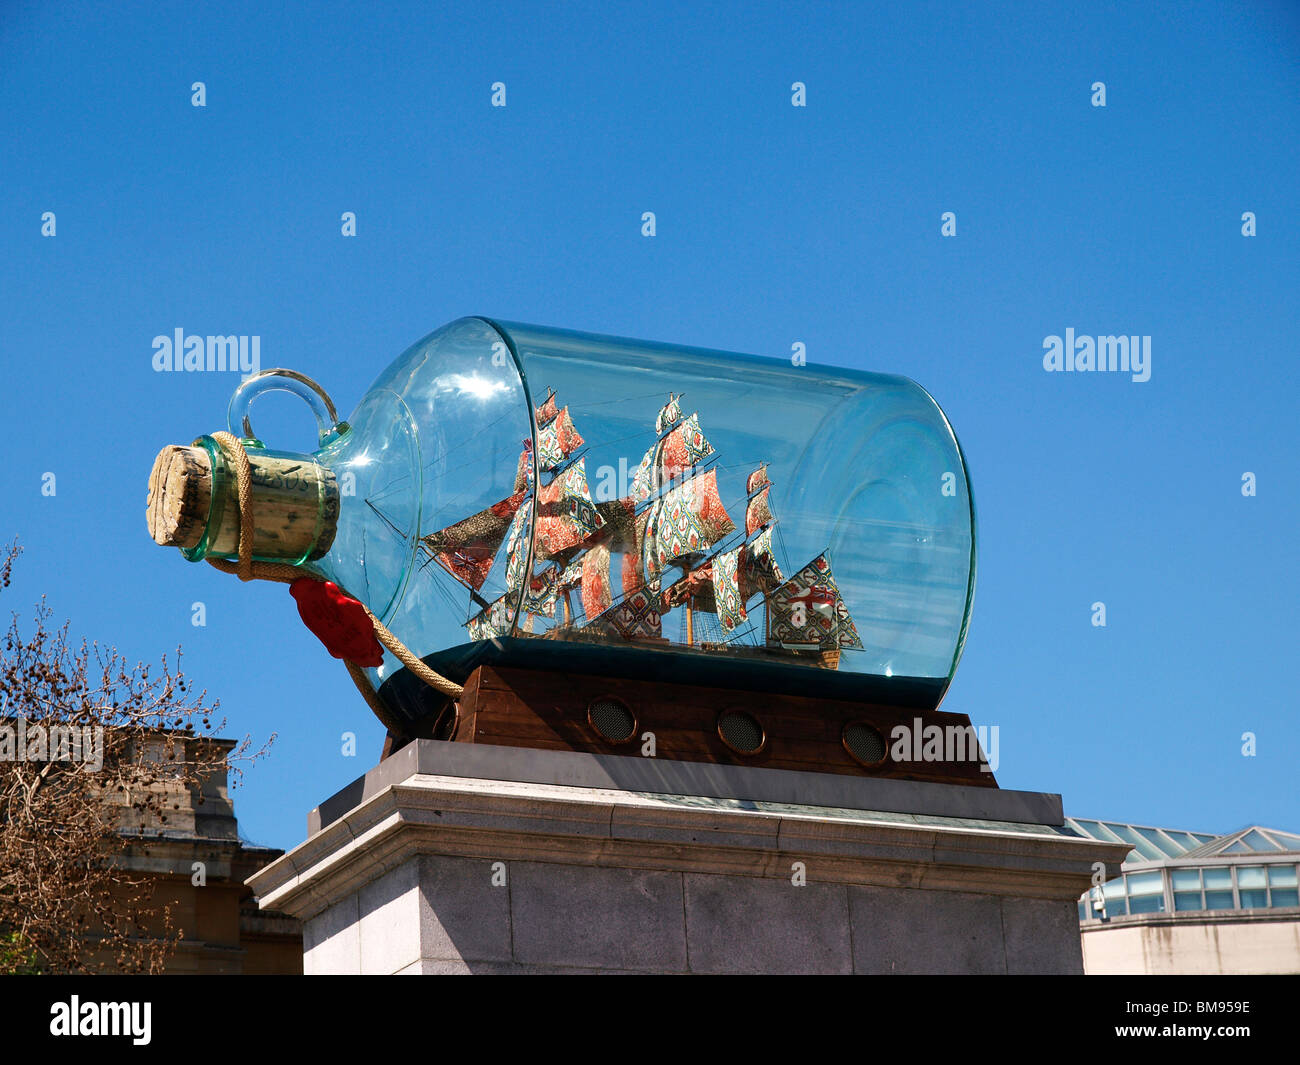 The sculpture of HMS Victory by  Yinka Shonibare on the Fourth Plinth in Trafalgar Square was unveiled today 24th May 2010. Stock Photo